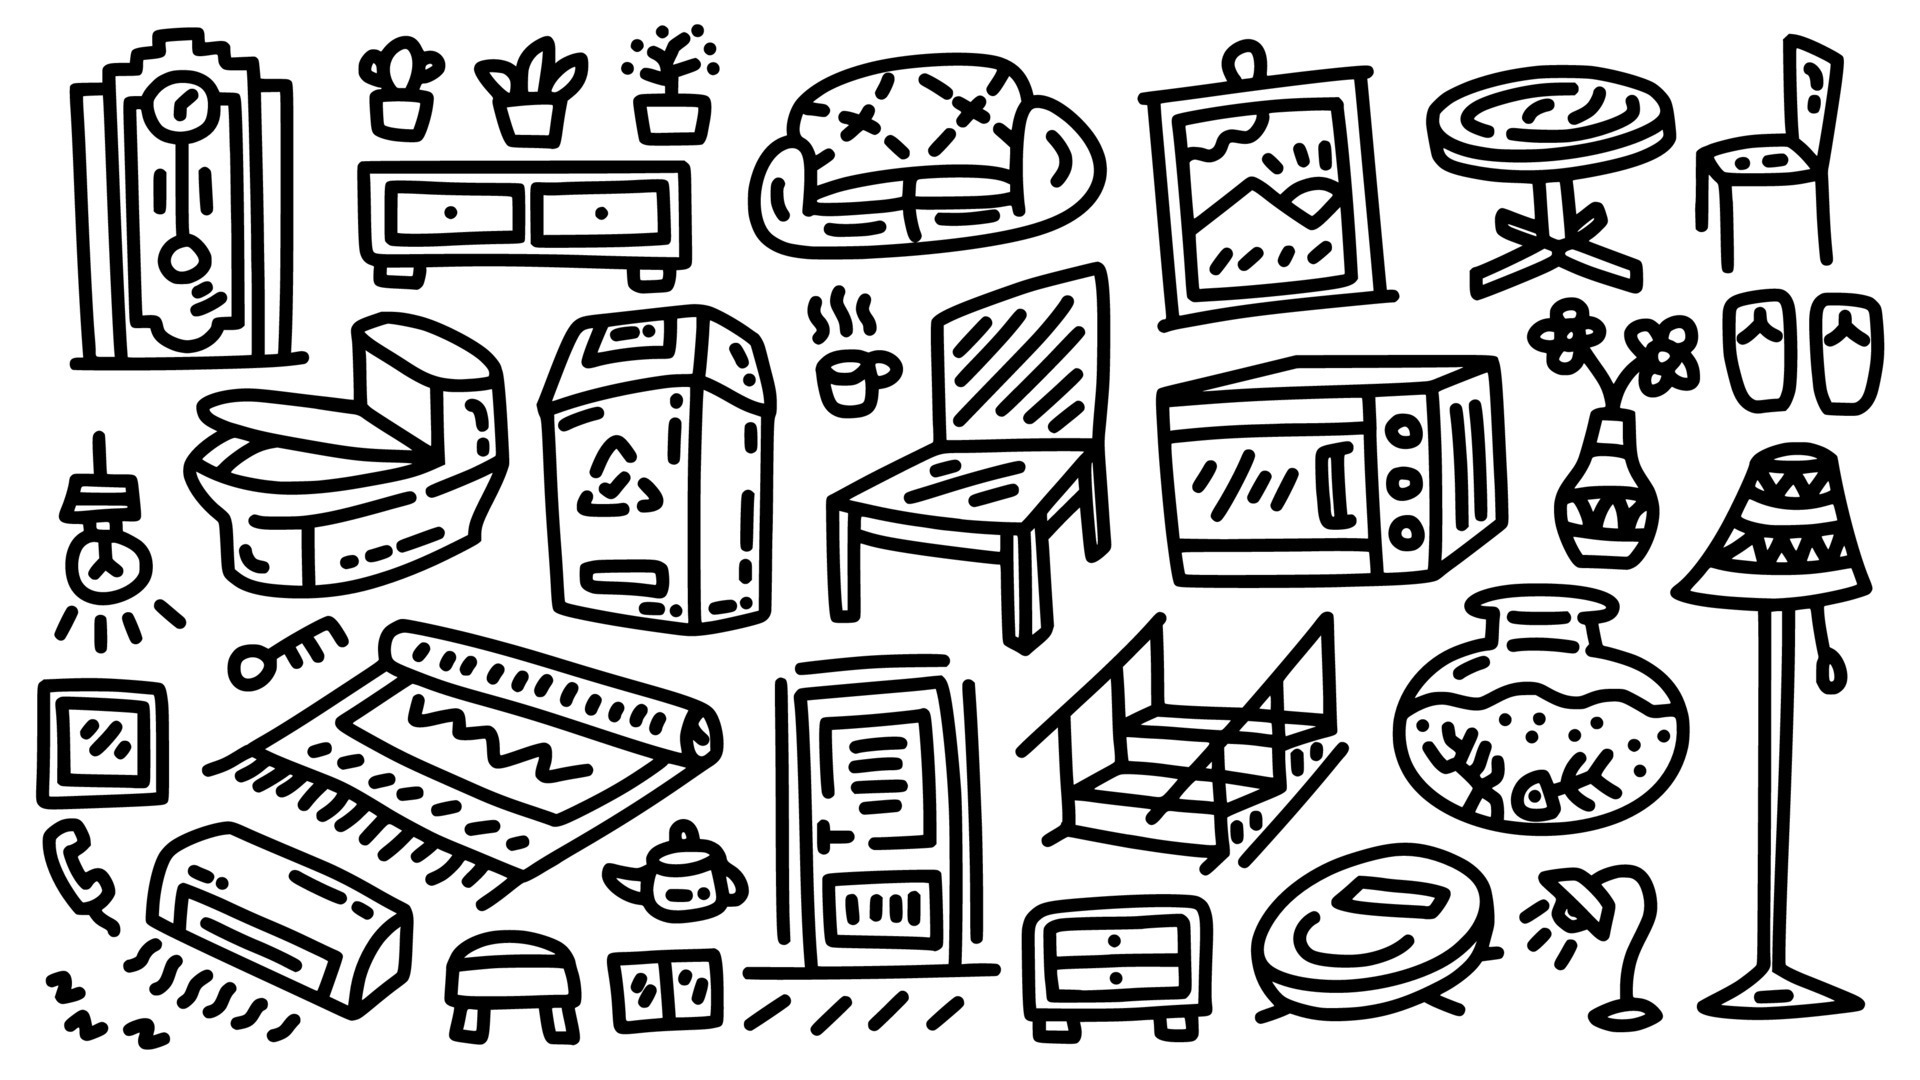 https://static.vecteezy.com/system/resources/previews/010/281/853/original/interior-and-furniture-icon-set-hand-drawn-doodle-cartoon-outline-illustration-collection-vector.jpg